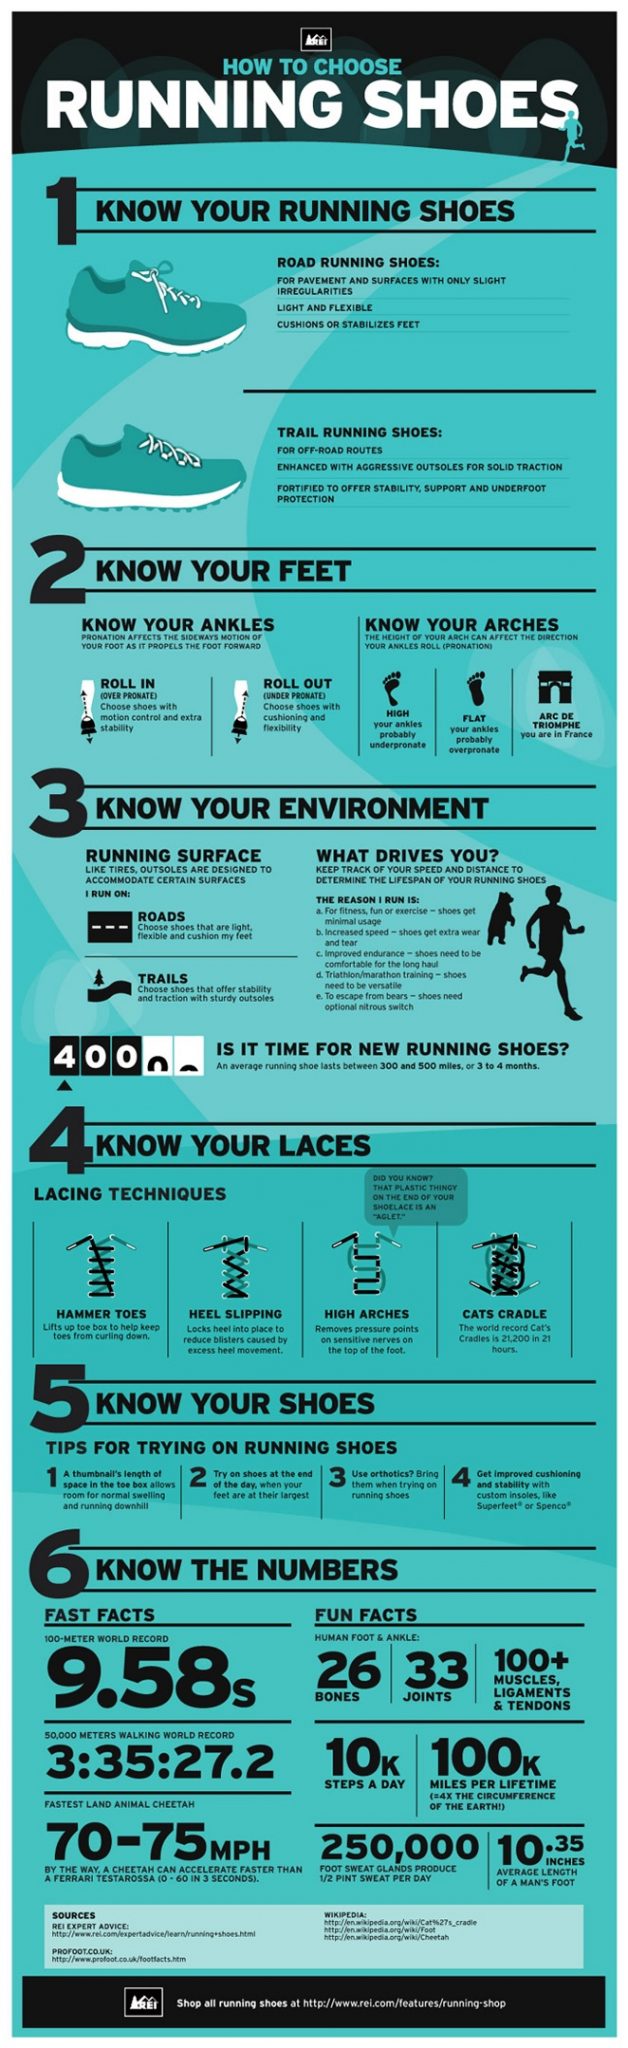 How to Choose Running Shoes {Infographic} - Best Infographics